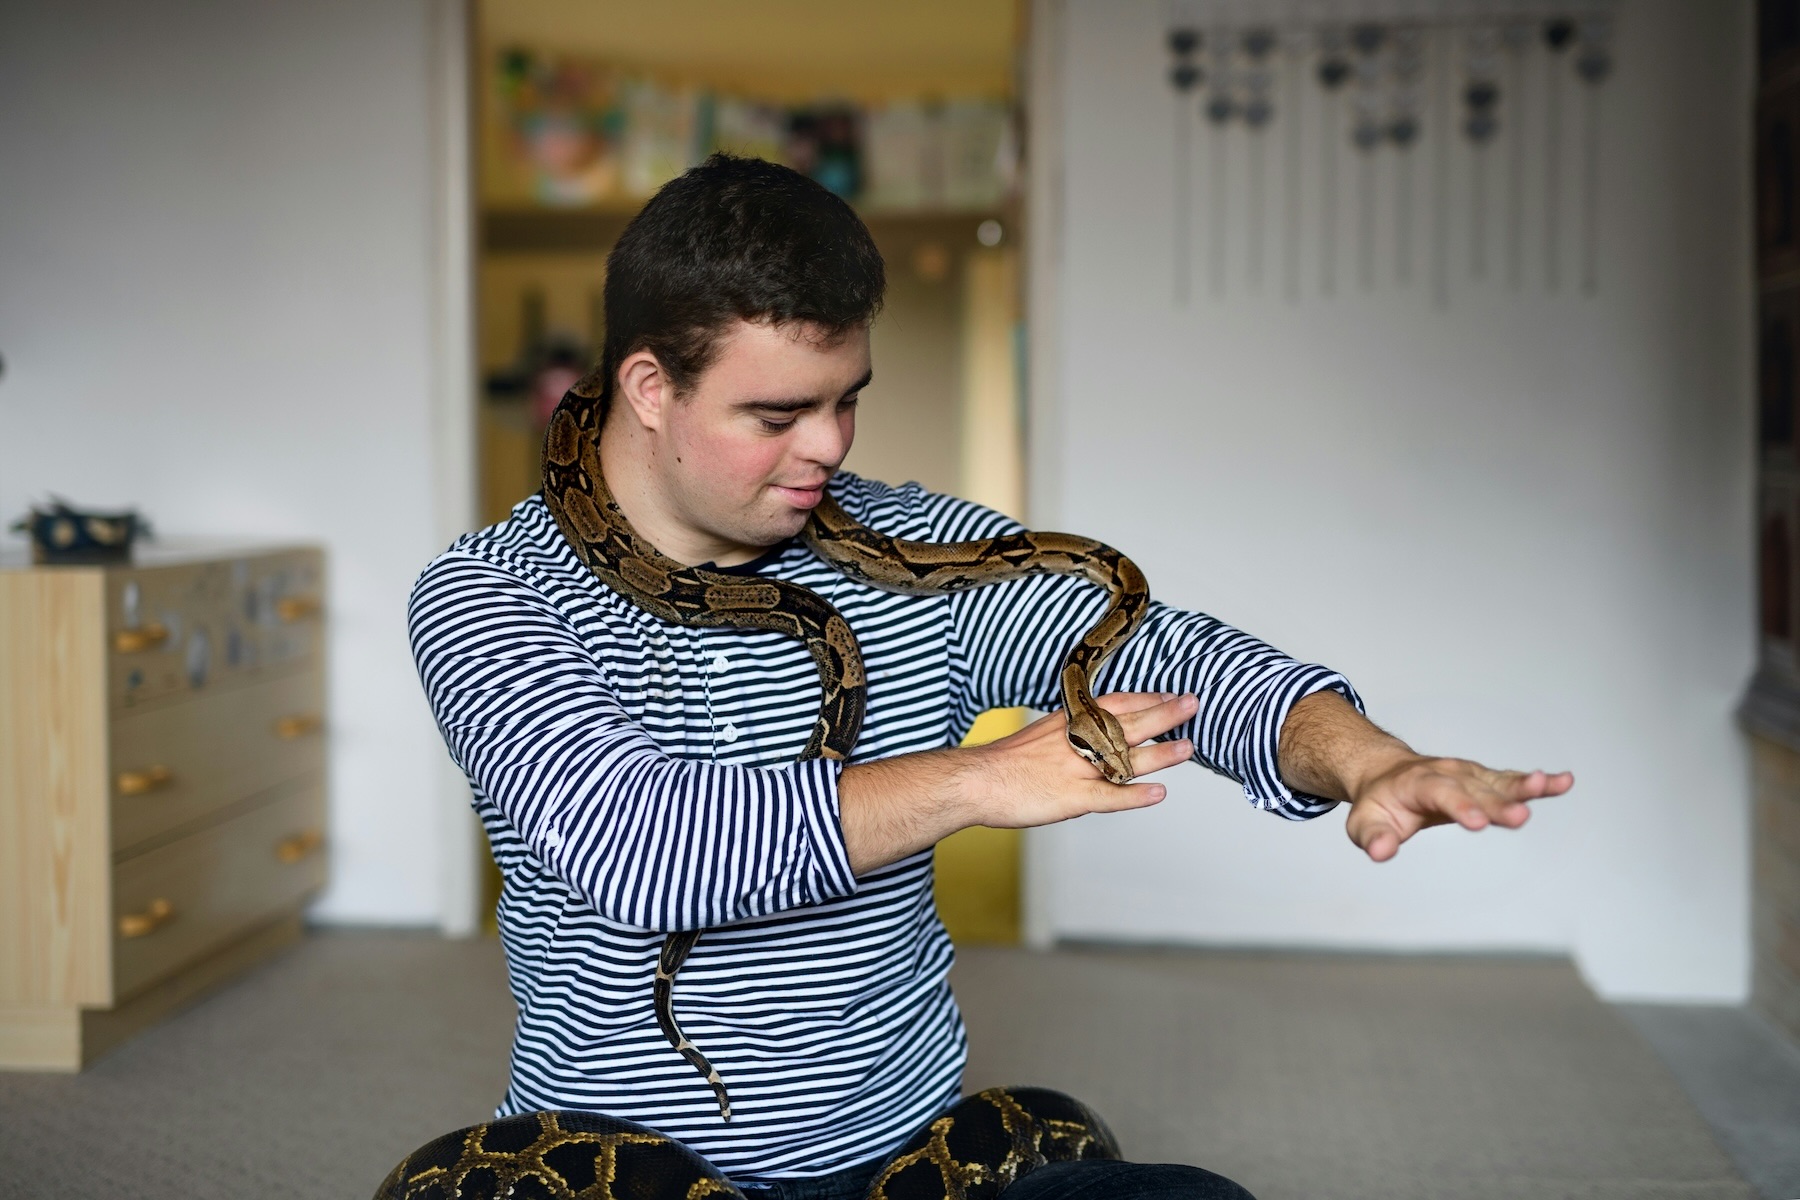 A man is playing with a large pet snake, it has wrapped itself around his shoulders